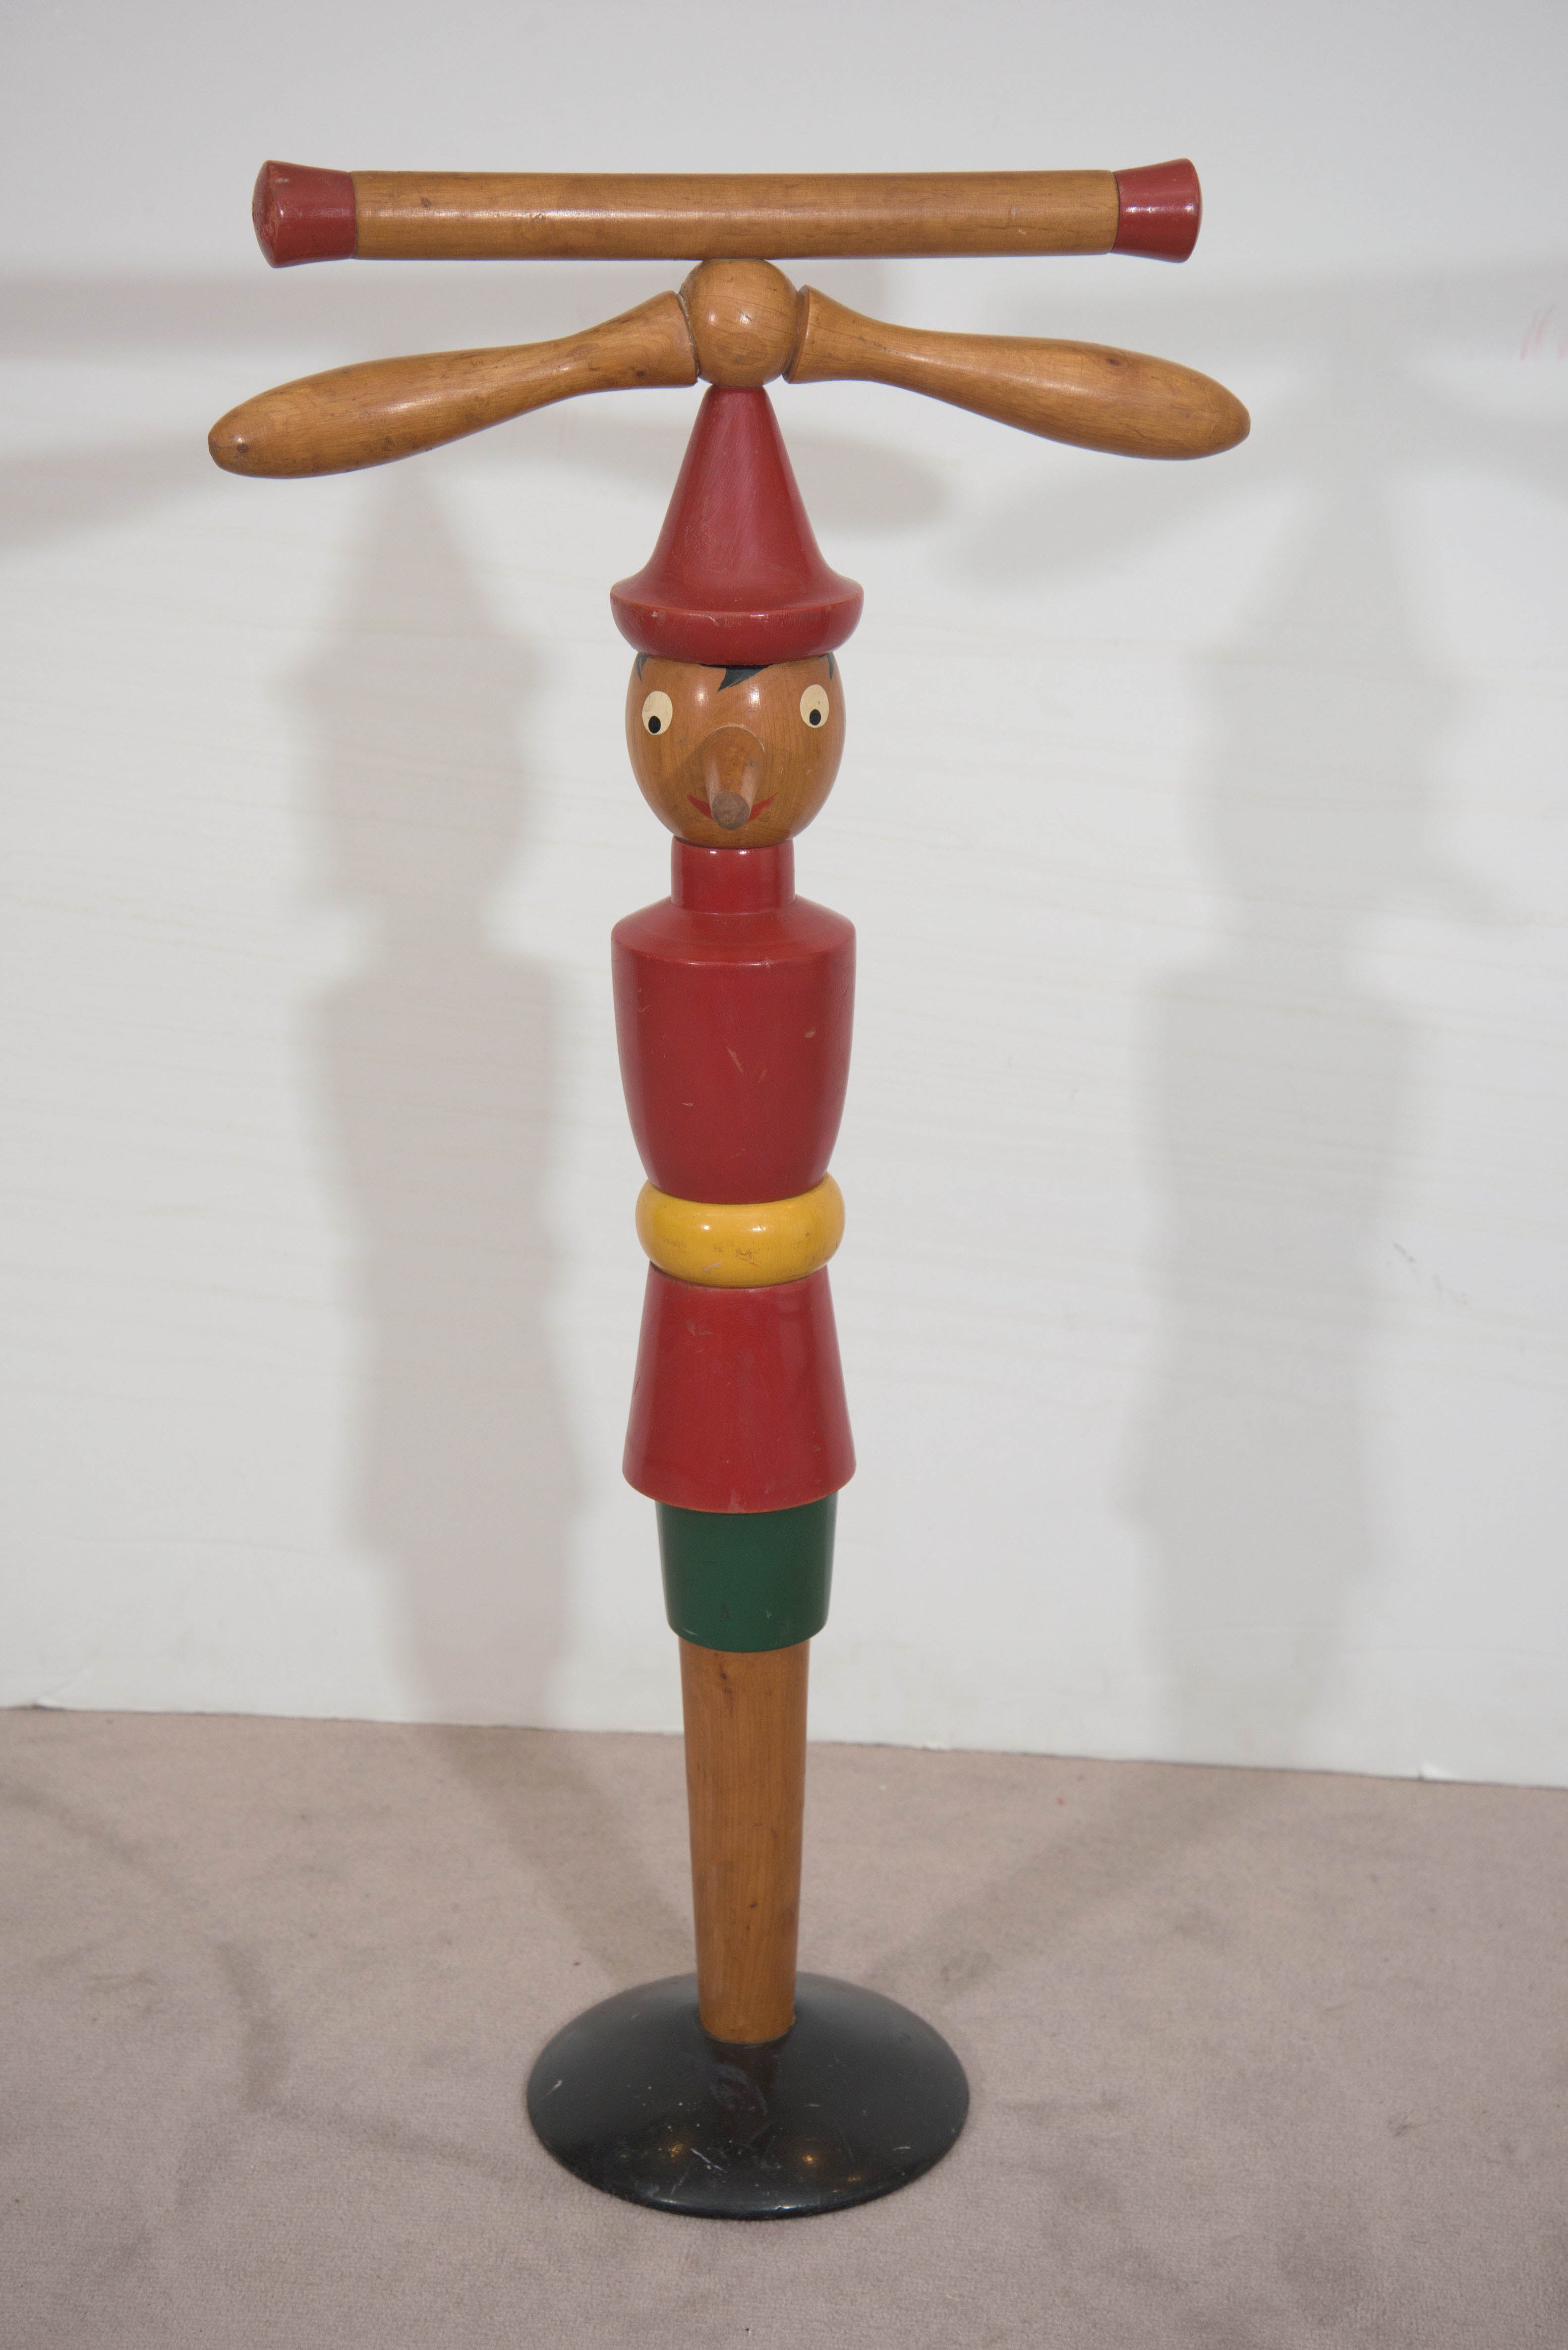 Italian Midcentury Child's Wooden Clothes Valet as Pinocchio by Ma.Gi